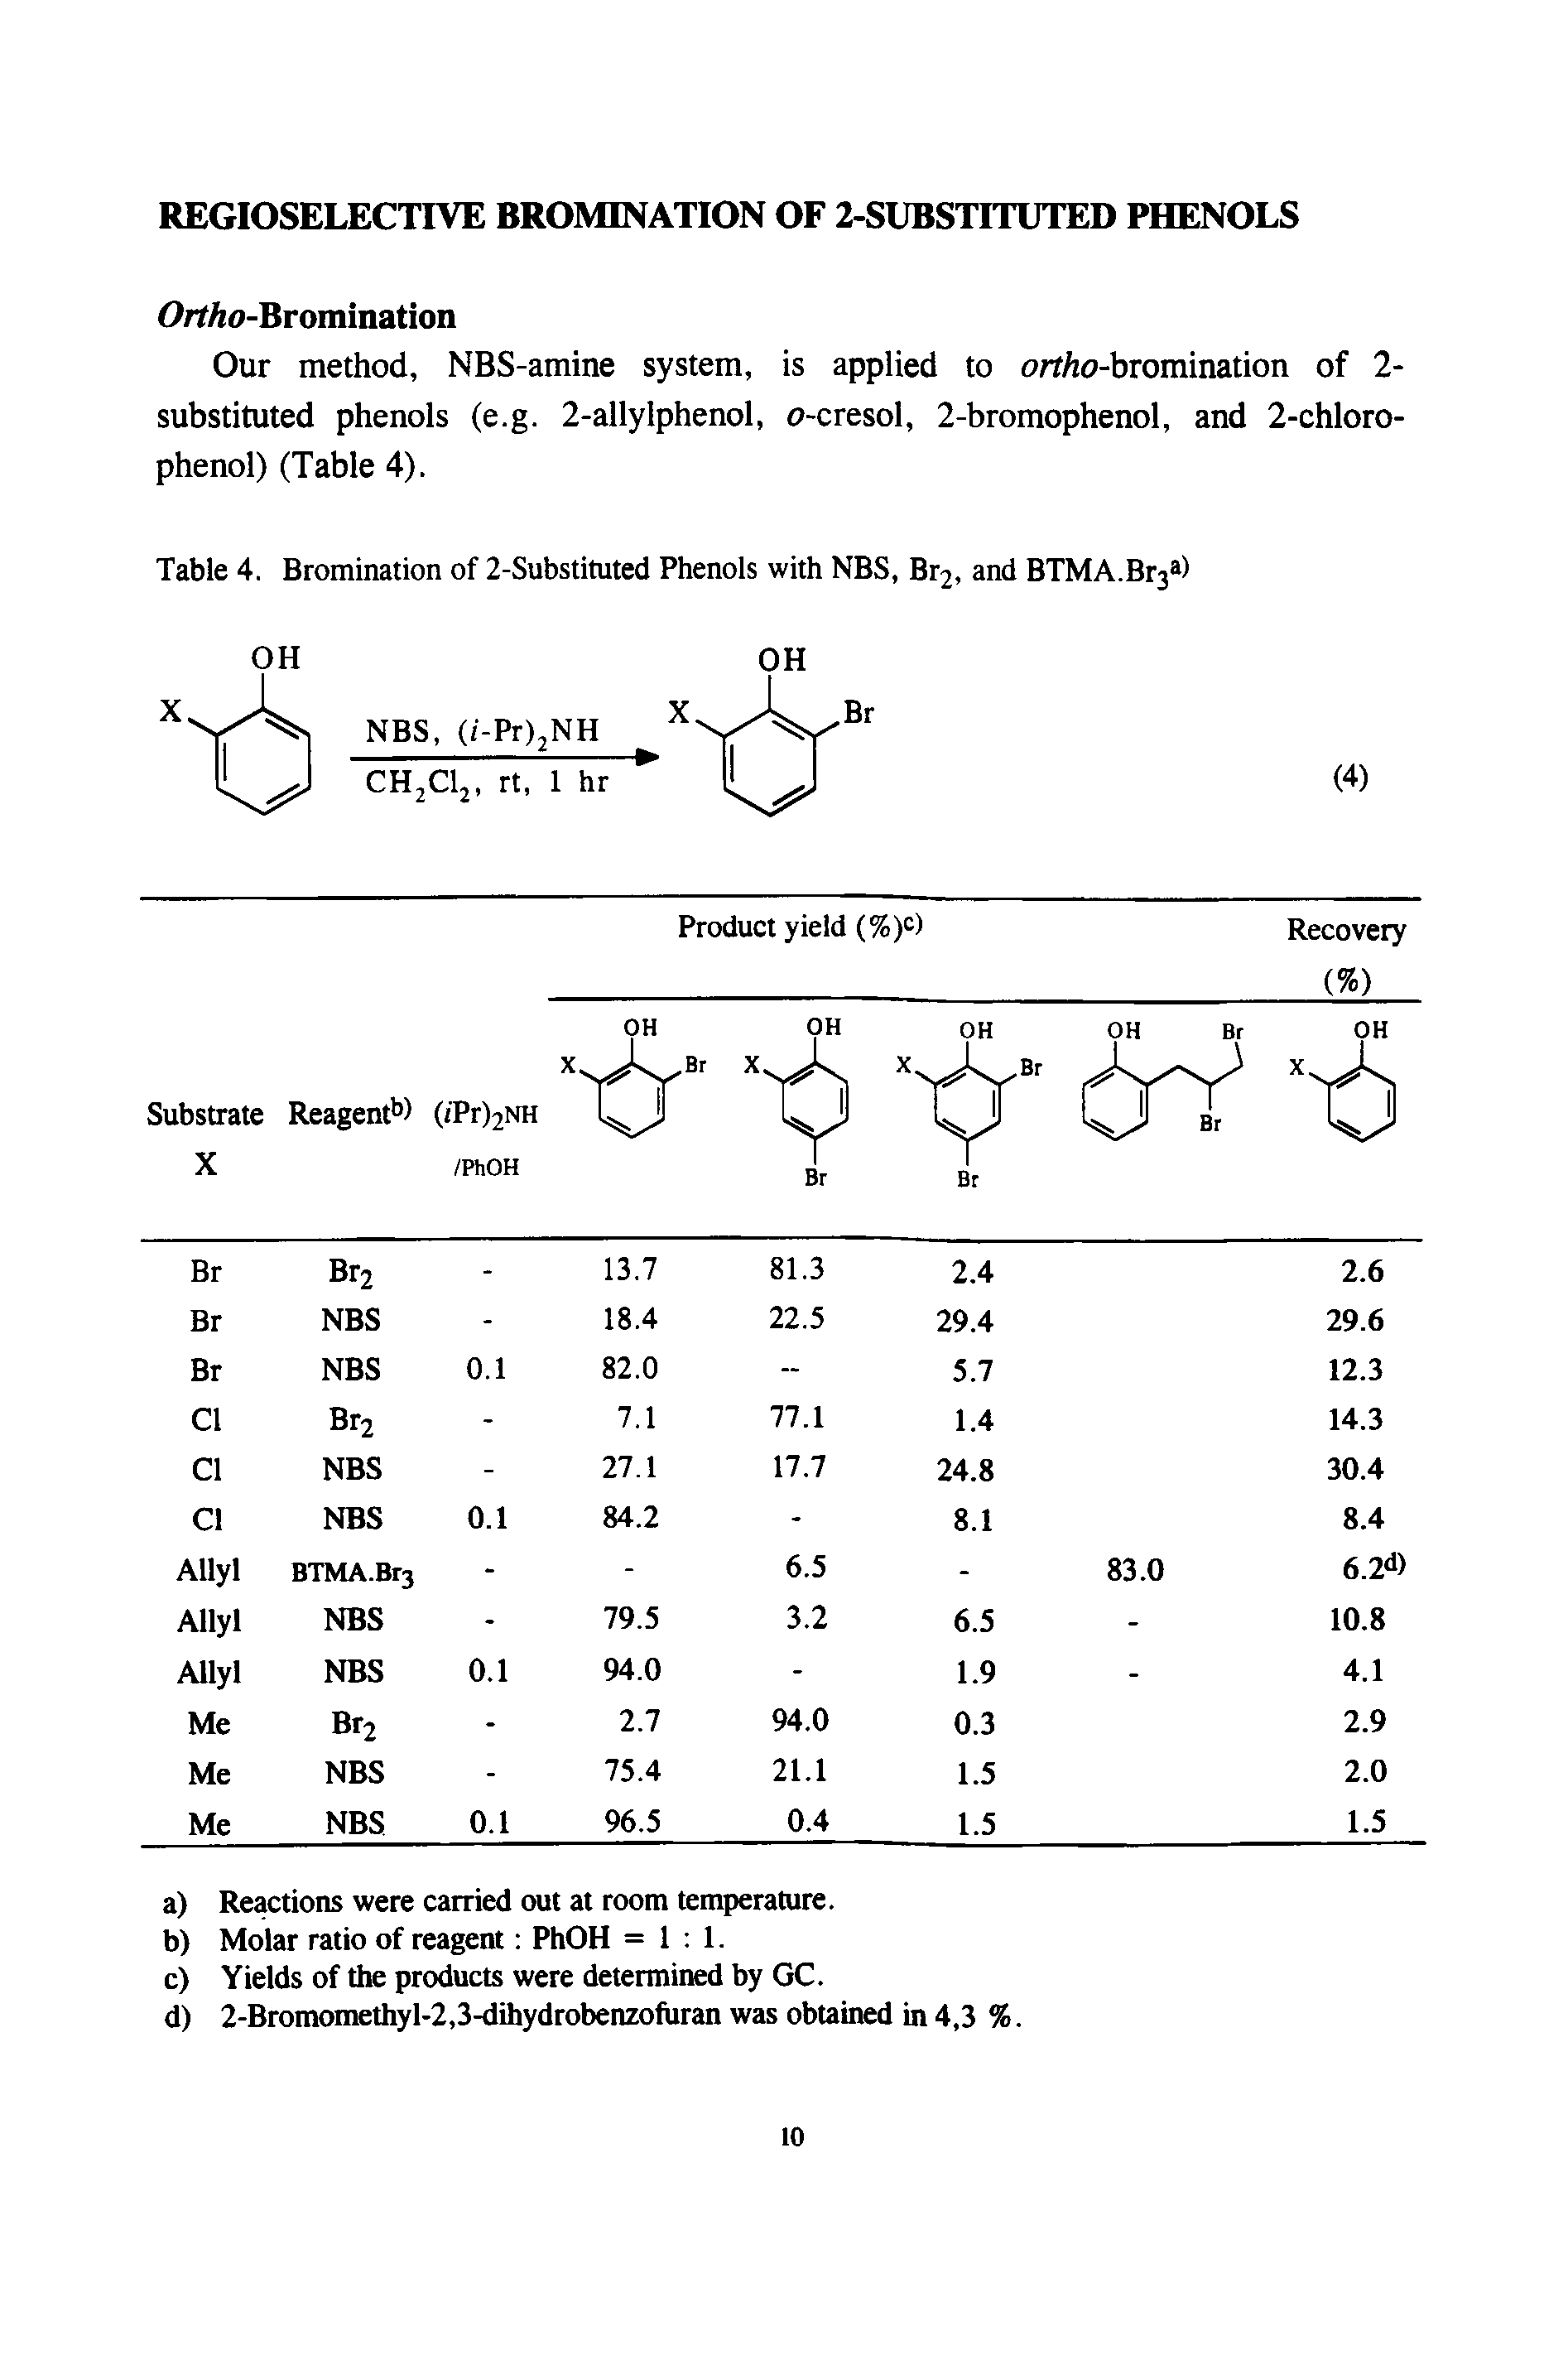 Table 4. Bromination of 2-Substituted Phenols with NBS, Bf2, and BTMA.Br3 ) OH...